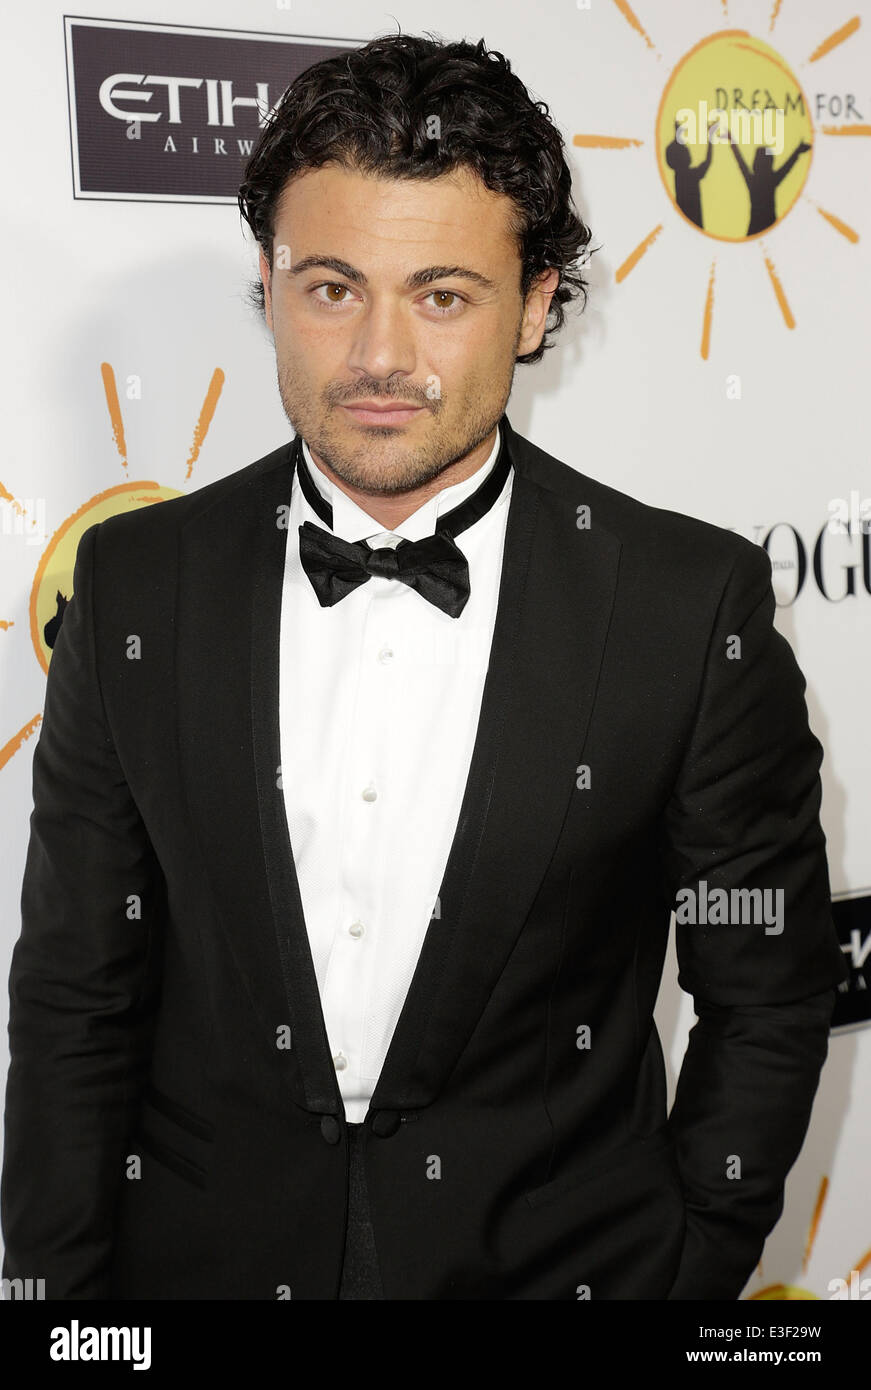 Celebrities attend Gelila & Wolfgang Puck’s Dream for Future Africa Foundation honoring Vogue Italia Editor-In-Chief Franca Sozzani at Spago Beverly Hills  Featuring: Vittorio Grigolo Where: Los Angeles, CA, United States When: 25 Oct 2013 Stock Photo